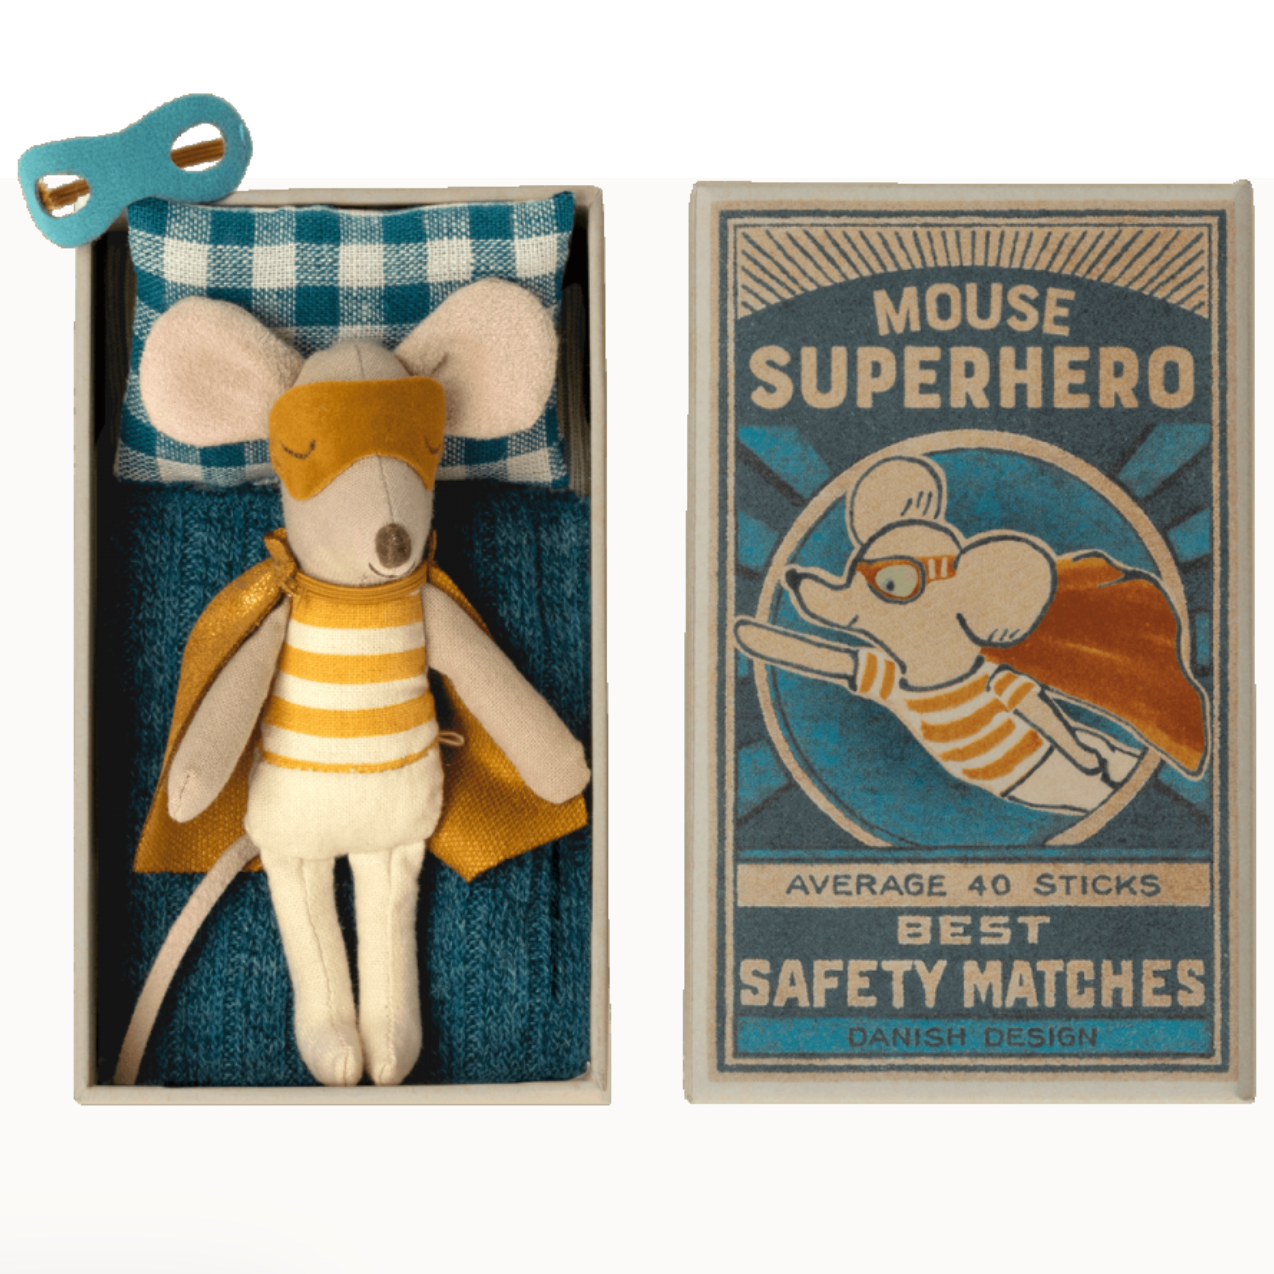 Maileg Super hero mouse, Little brother in matchbox